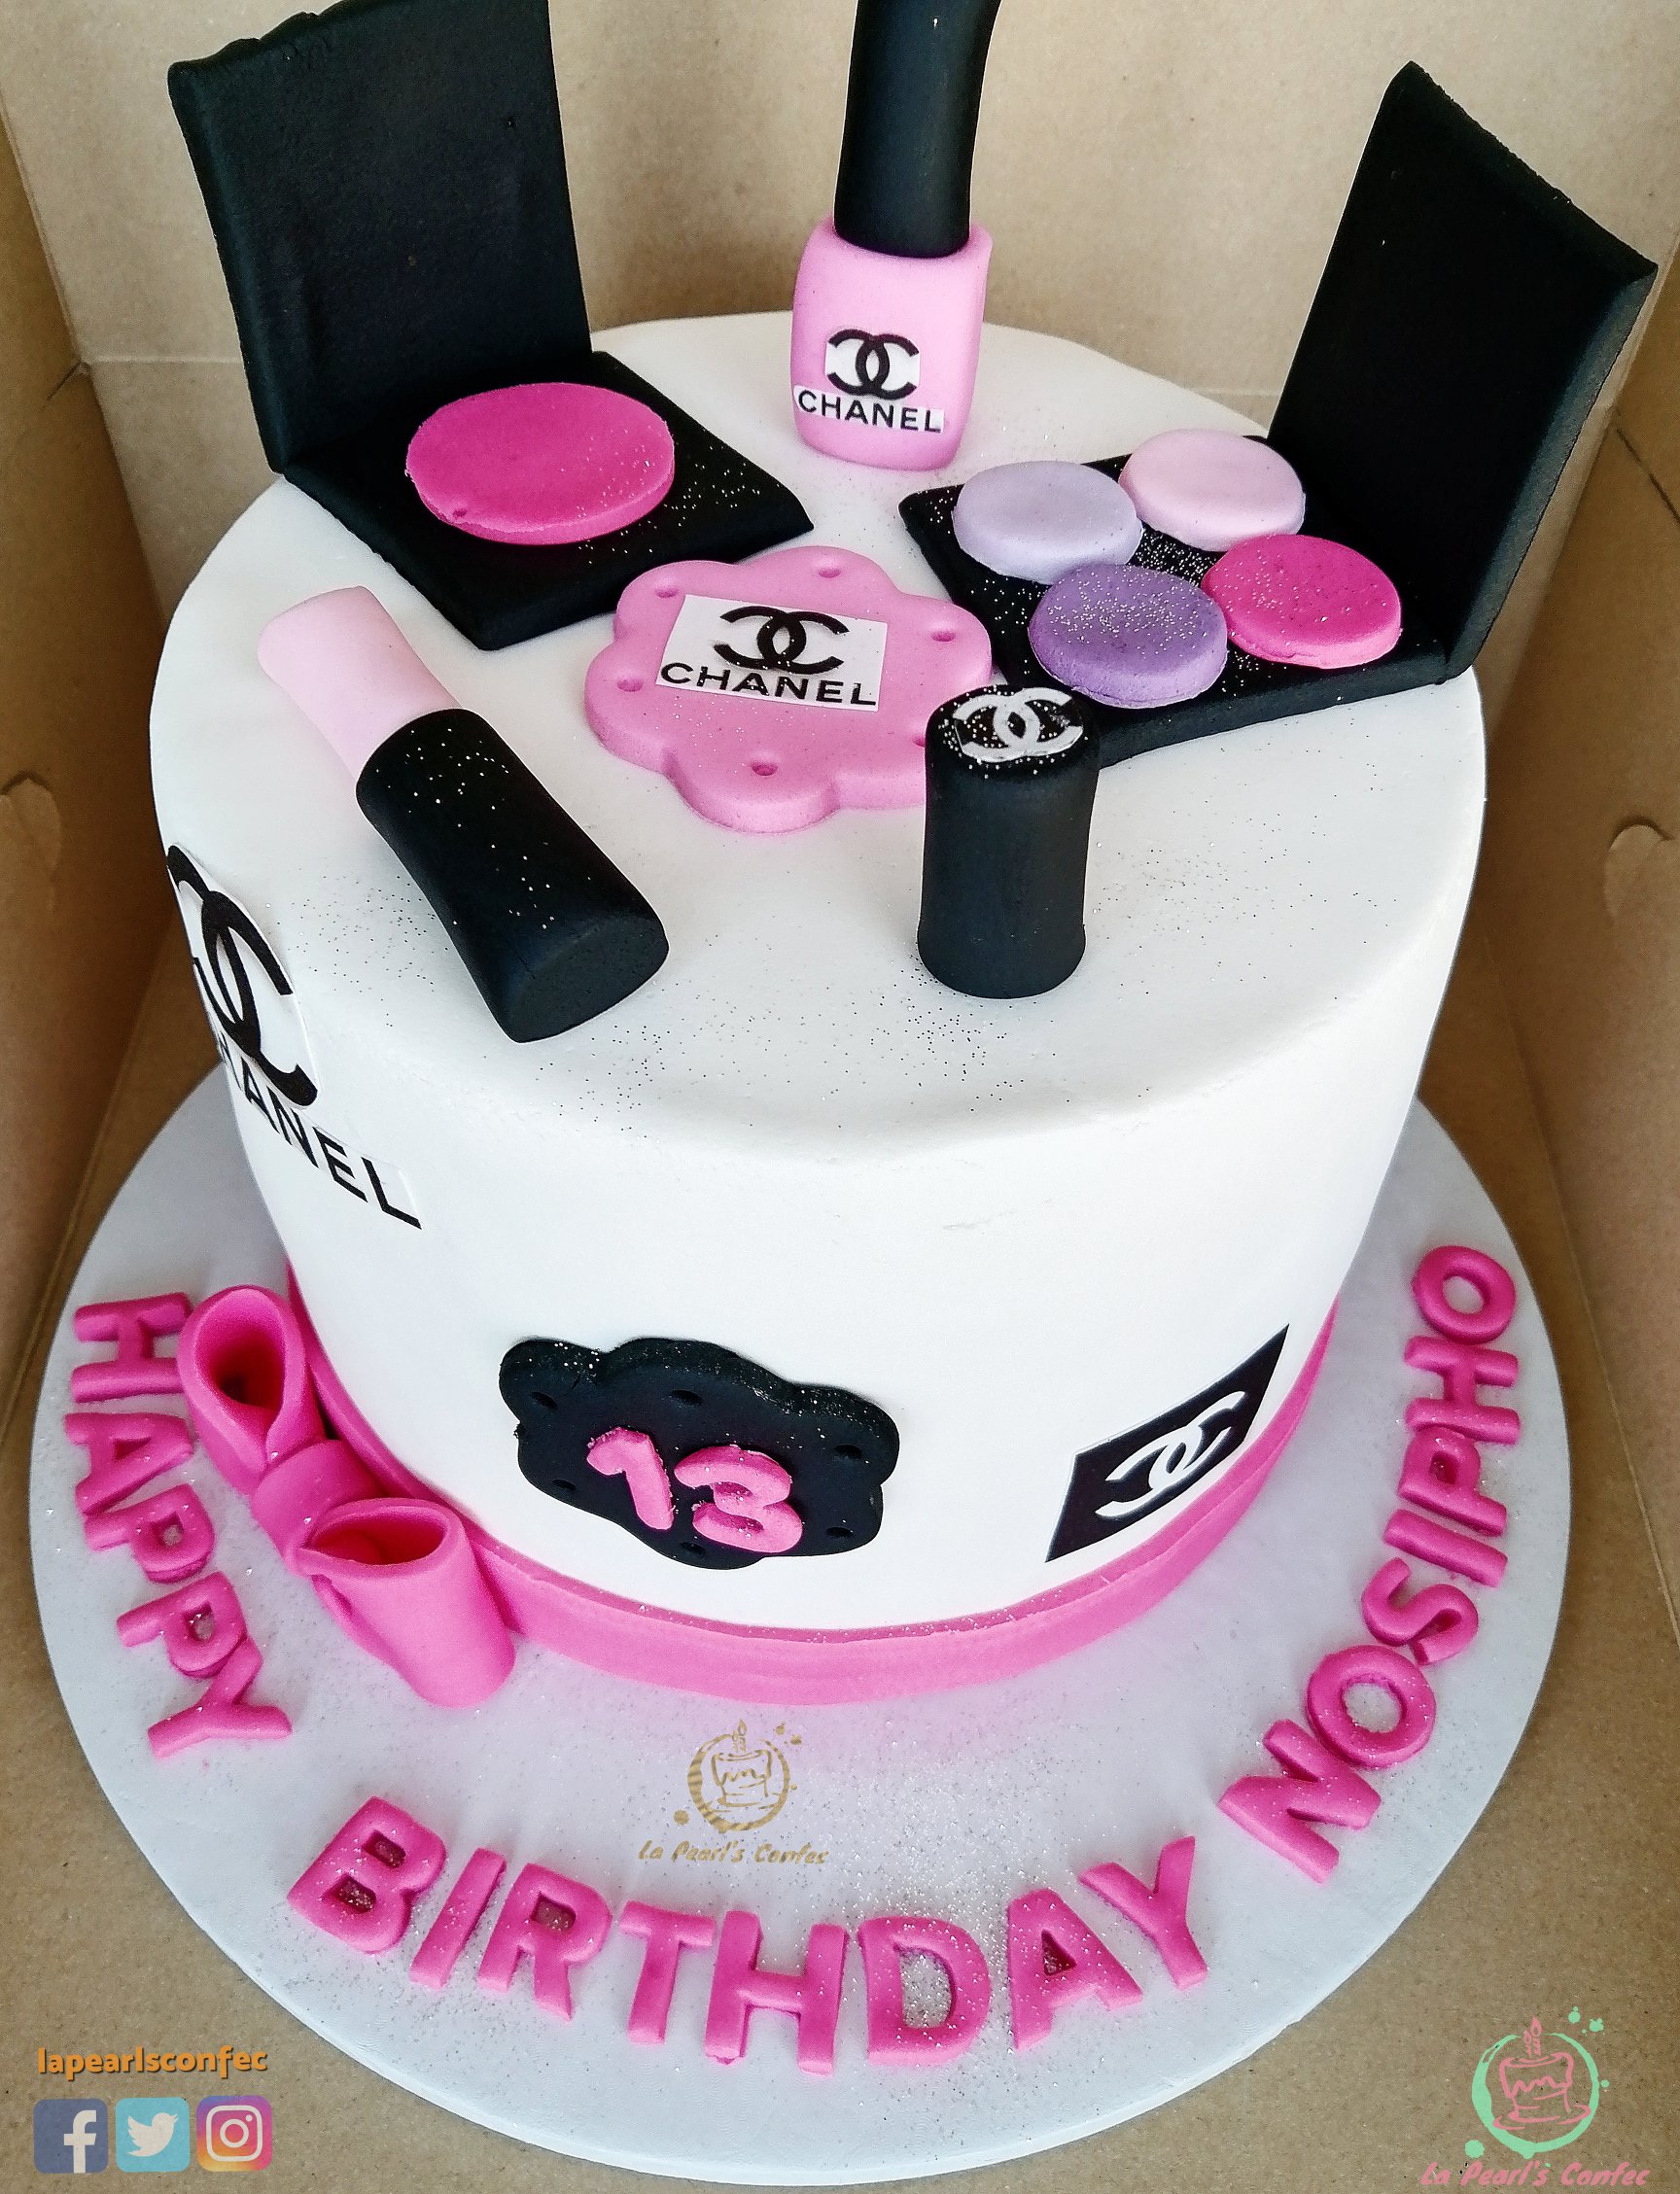 Coco Chanel cake 1  Chanel cake, Chanel birthday cake, Coco chanel cake